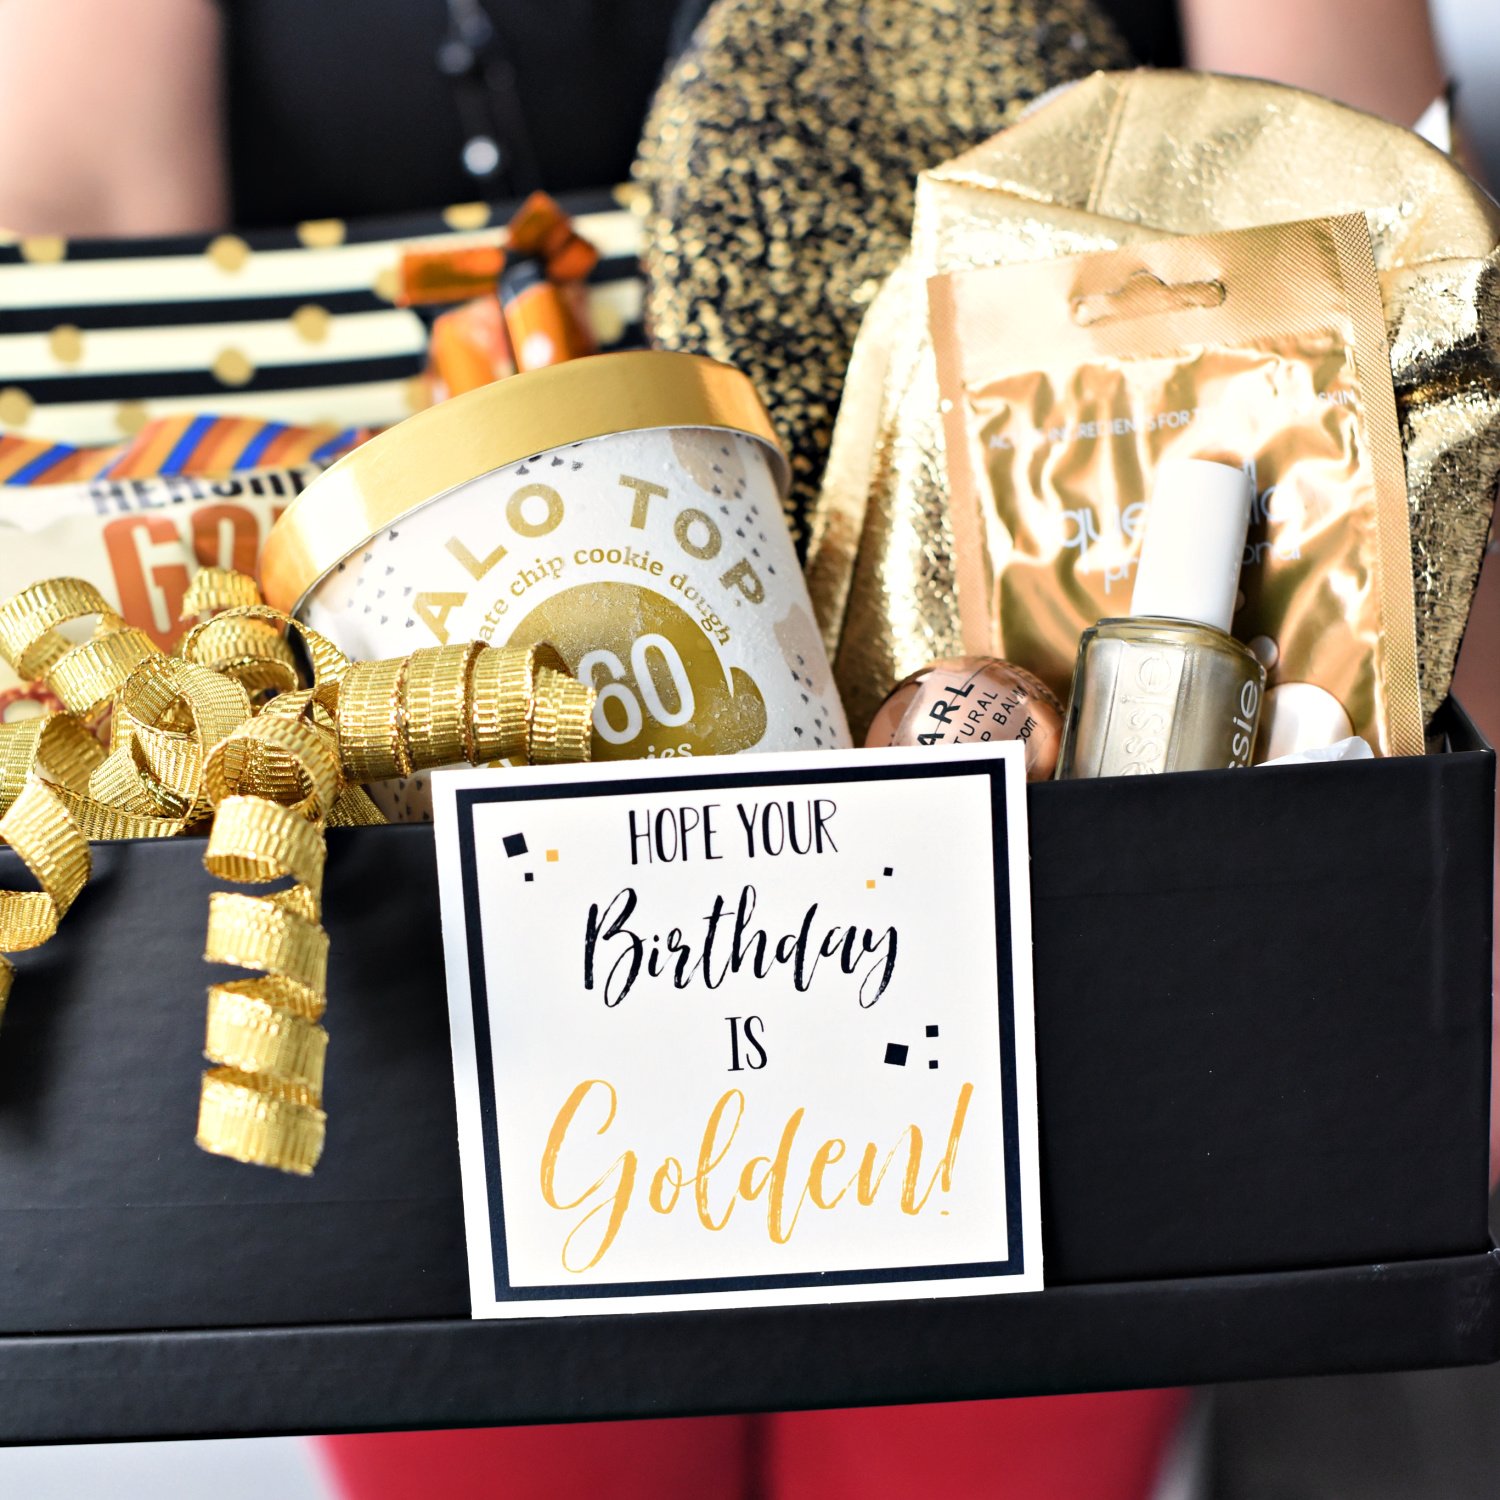 What is a good gift for a golden birthday